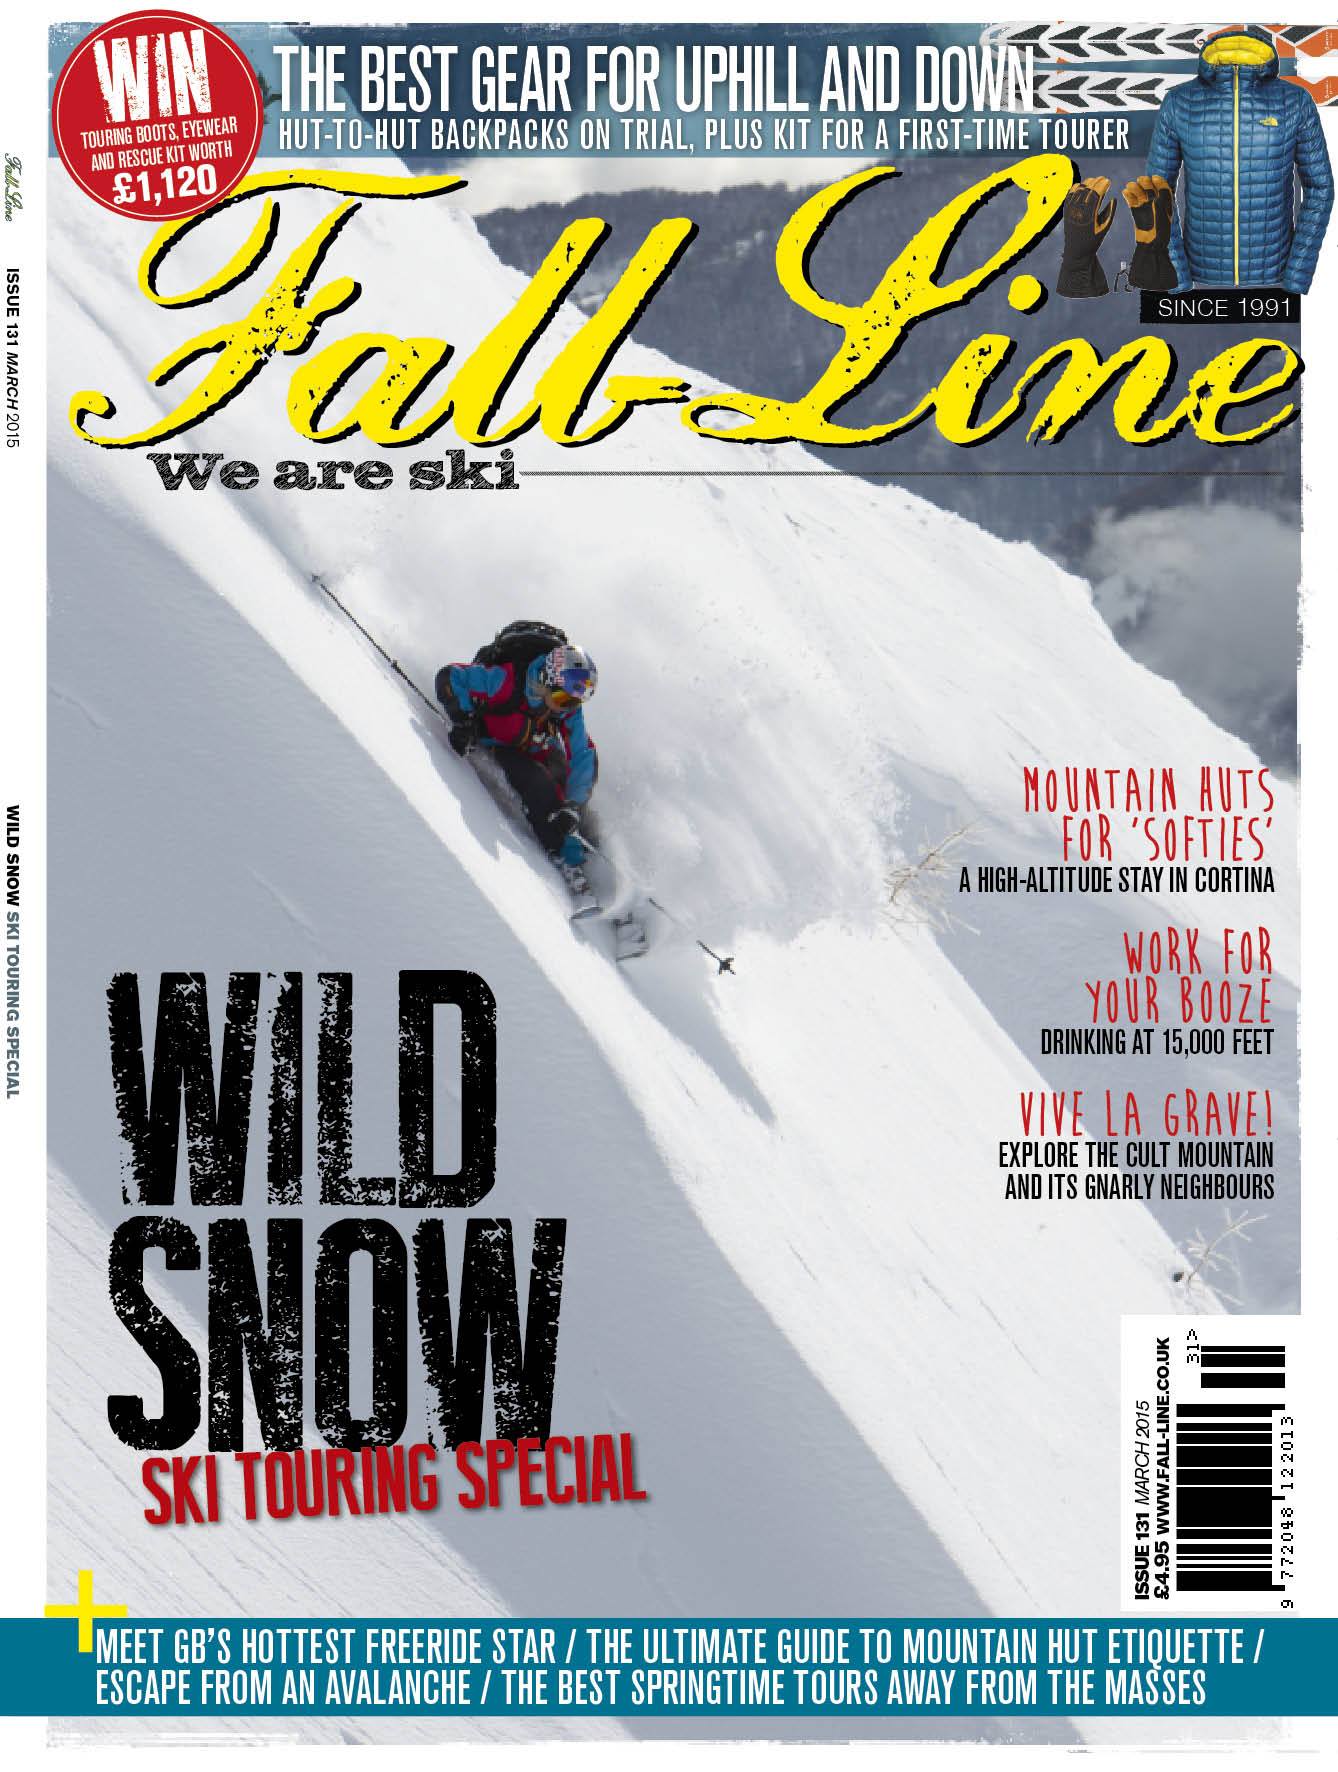 Issue 131 of Fall-Line, featuring la grave and Ian McIntosh. Order a back issue here